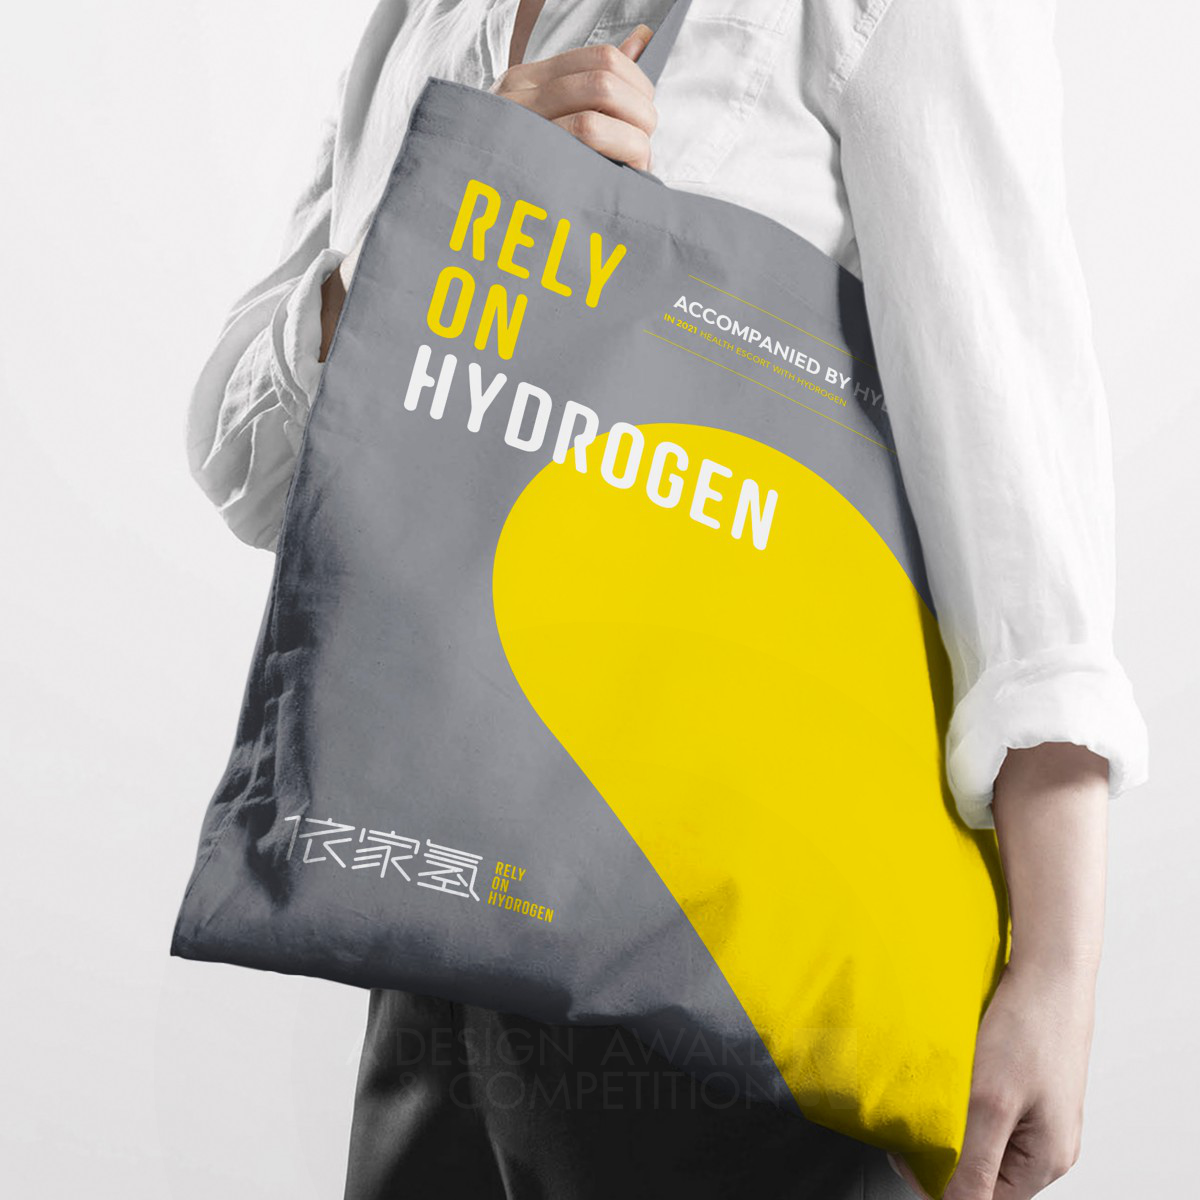 Rely on Hydrogen